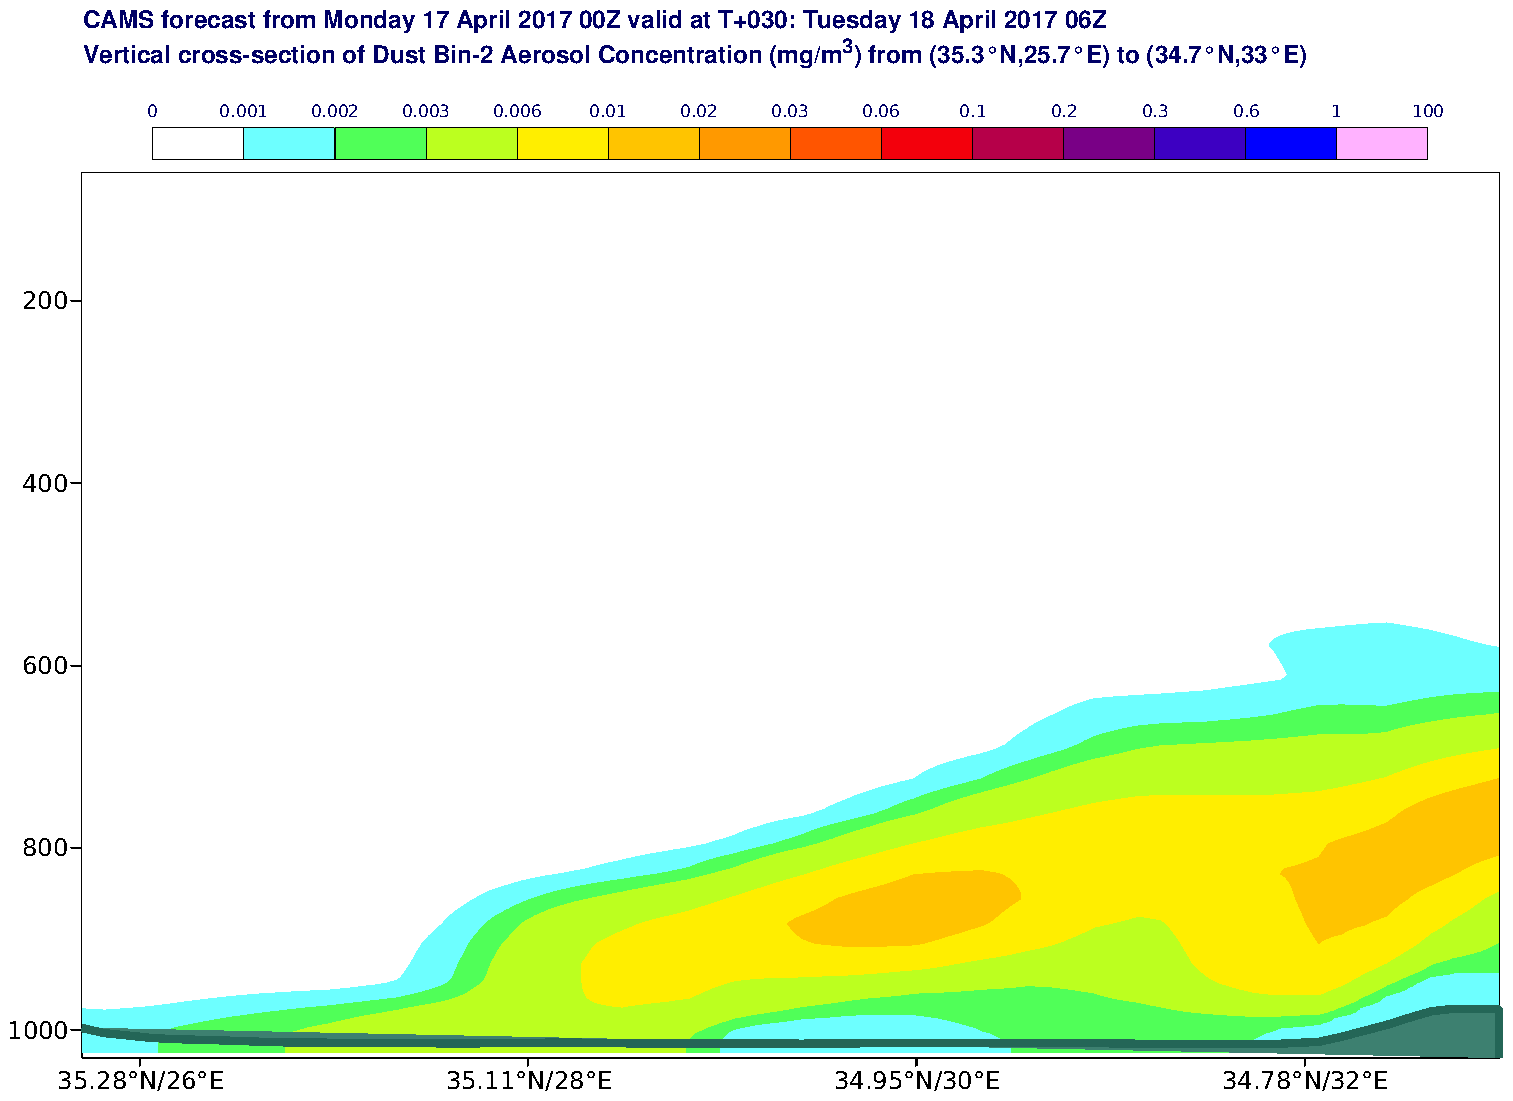 Vertical cross-section of Dust Bin-2 Aerosol Concentration (mg/m3) valid at T30 - 2017-04-18 06:00